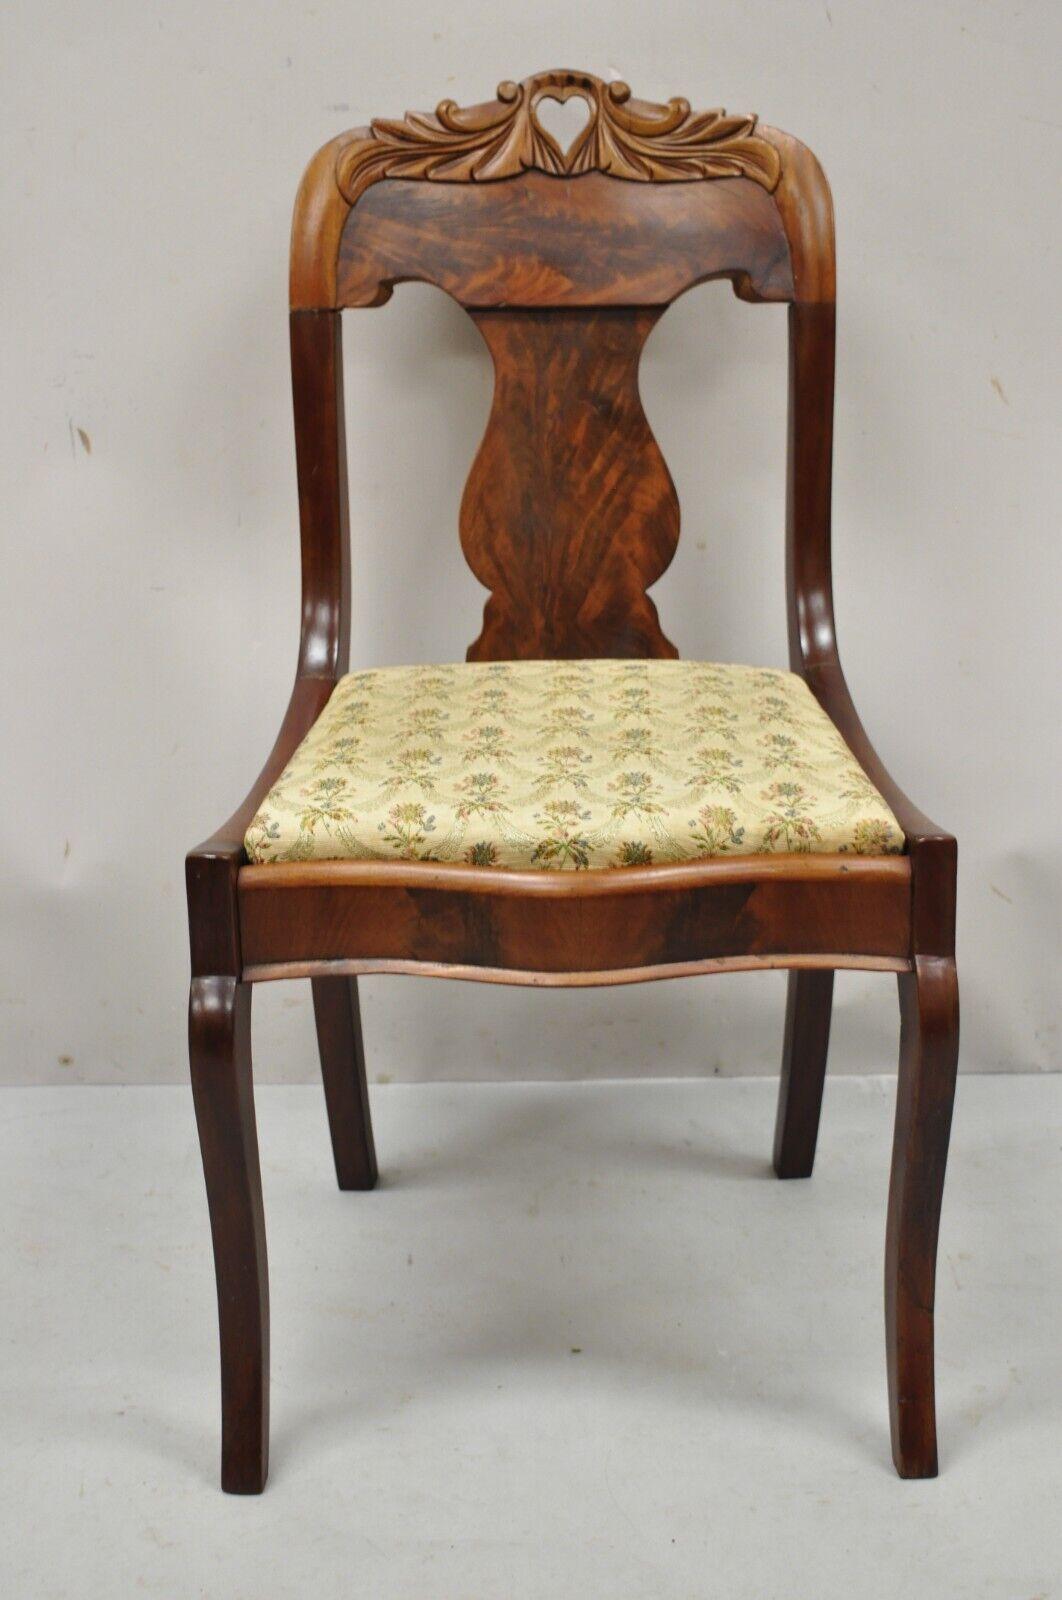 Antique American Empire Victorian Crotch mahogany carved accent side chair. Item features beautiful wood grain, nicely carved details, very nice antique item, great style and form. Circa 19th century. Measurements: 32.25